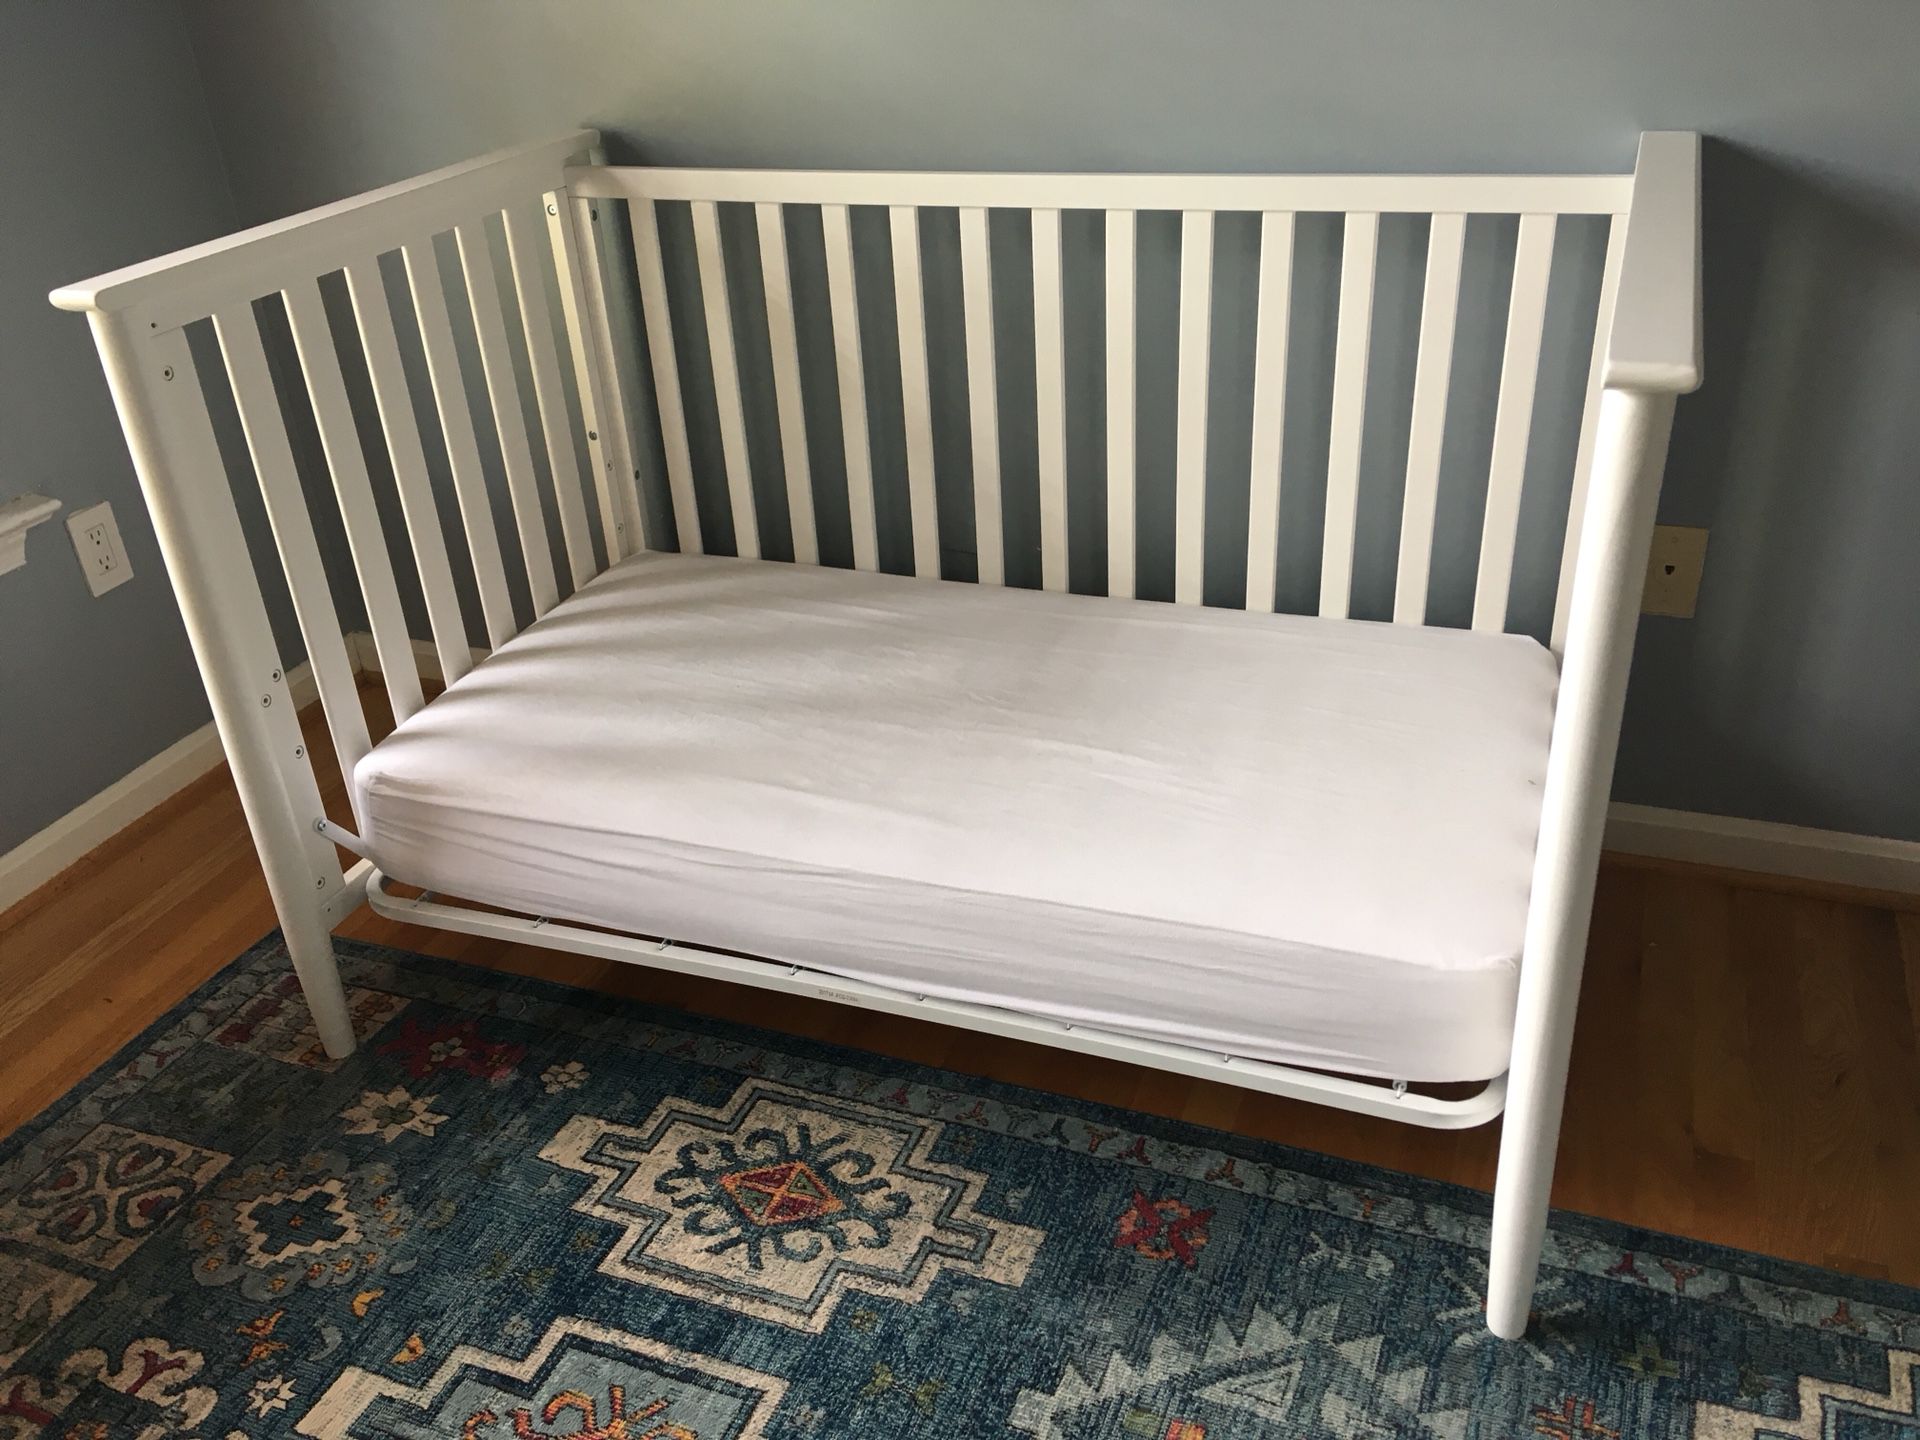 Delta Adley 3-in-1 Crib and Toddler Bed from Target